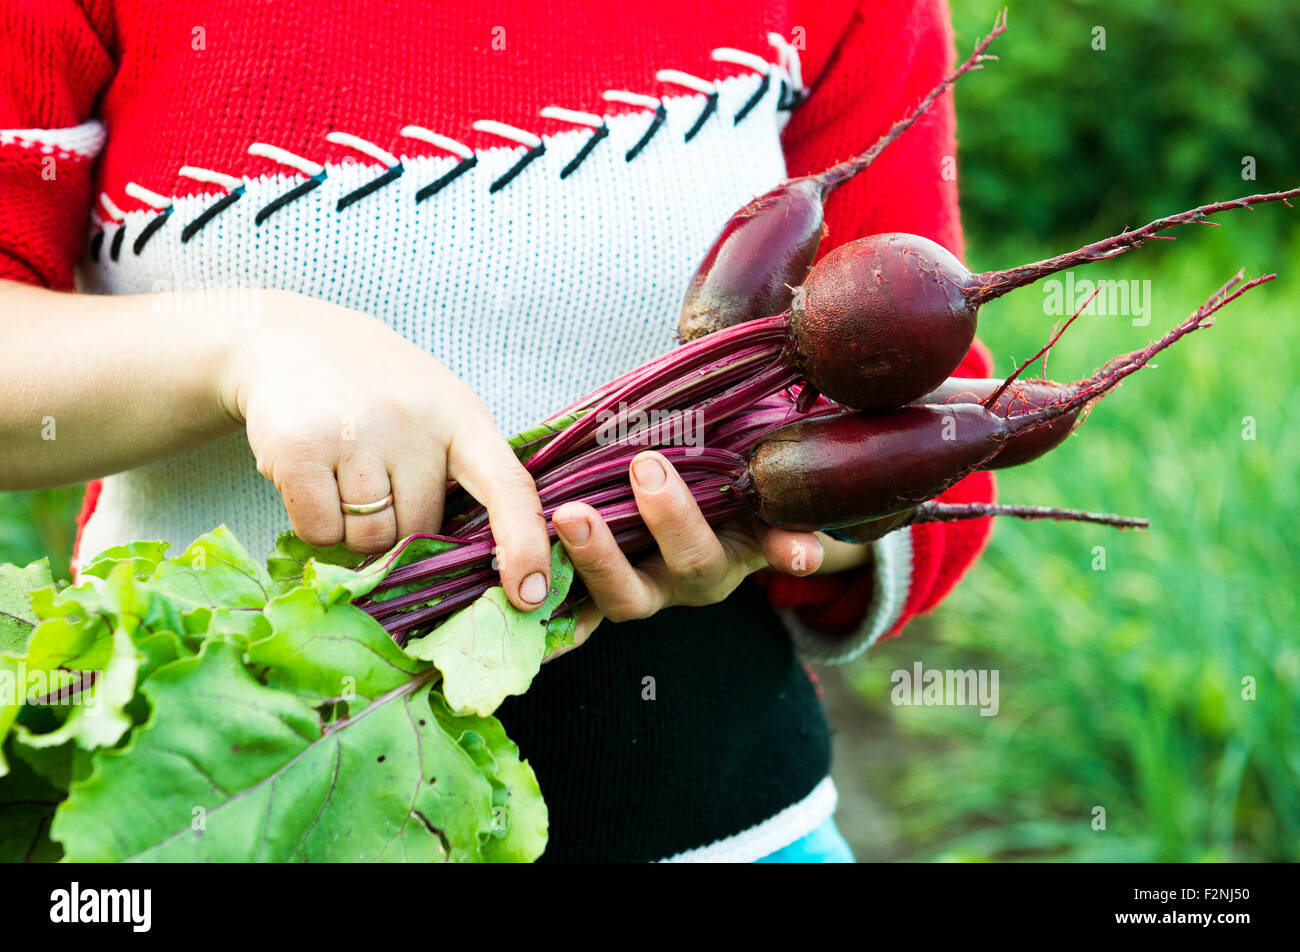 Caucasian farmer holding fresh beets in garden Banque D'Images